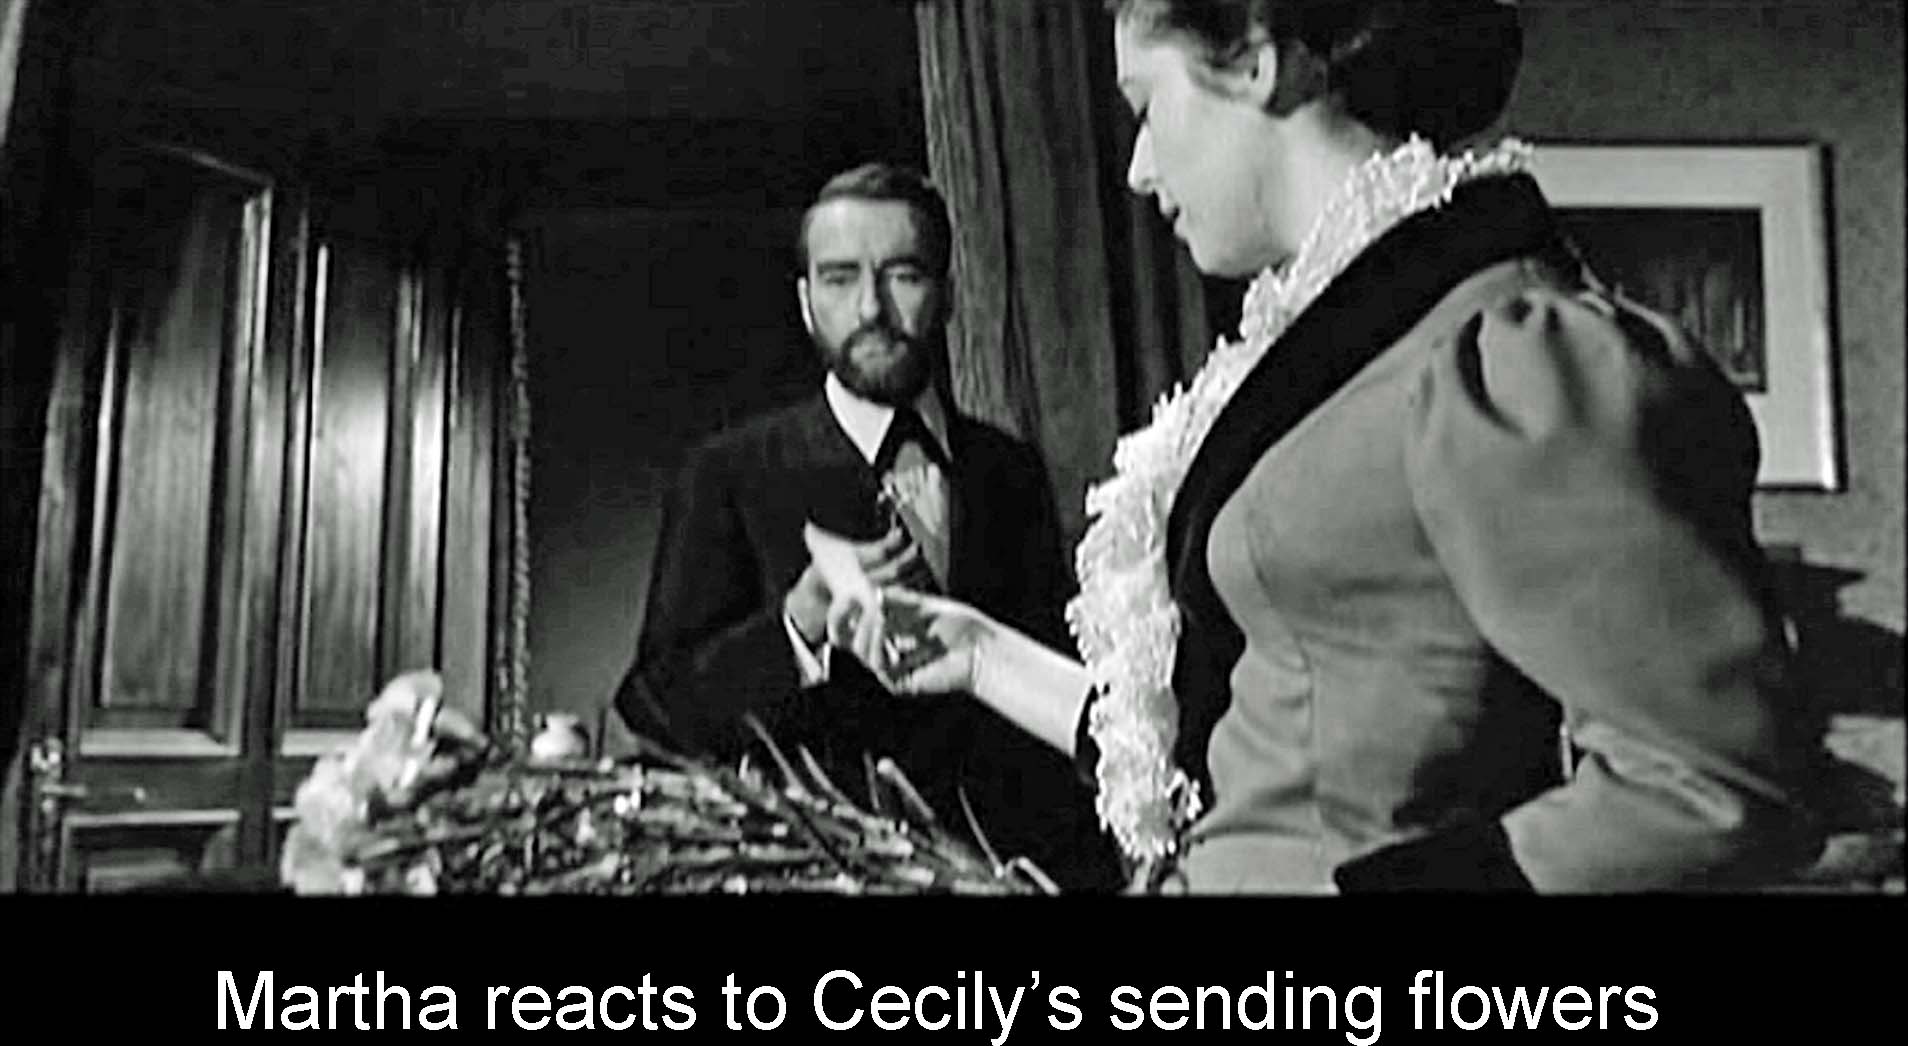 Martha reacts to Cecily's sending flowers